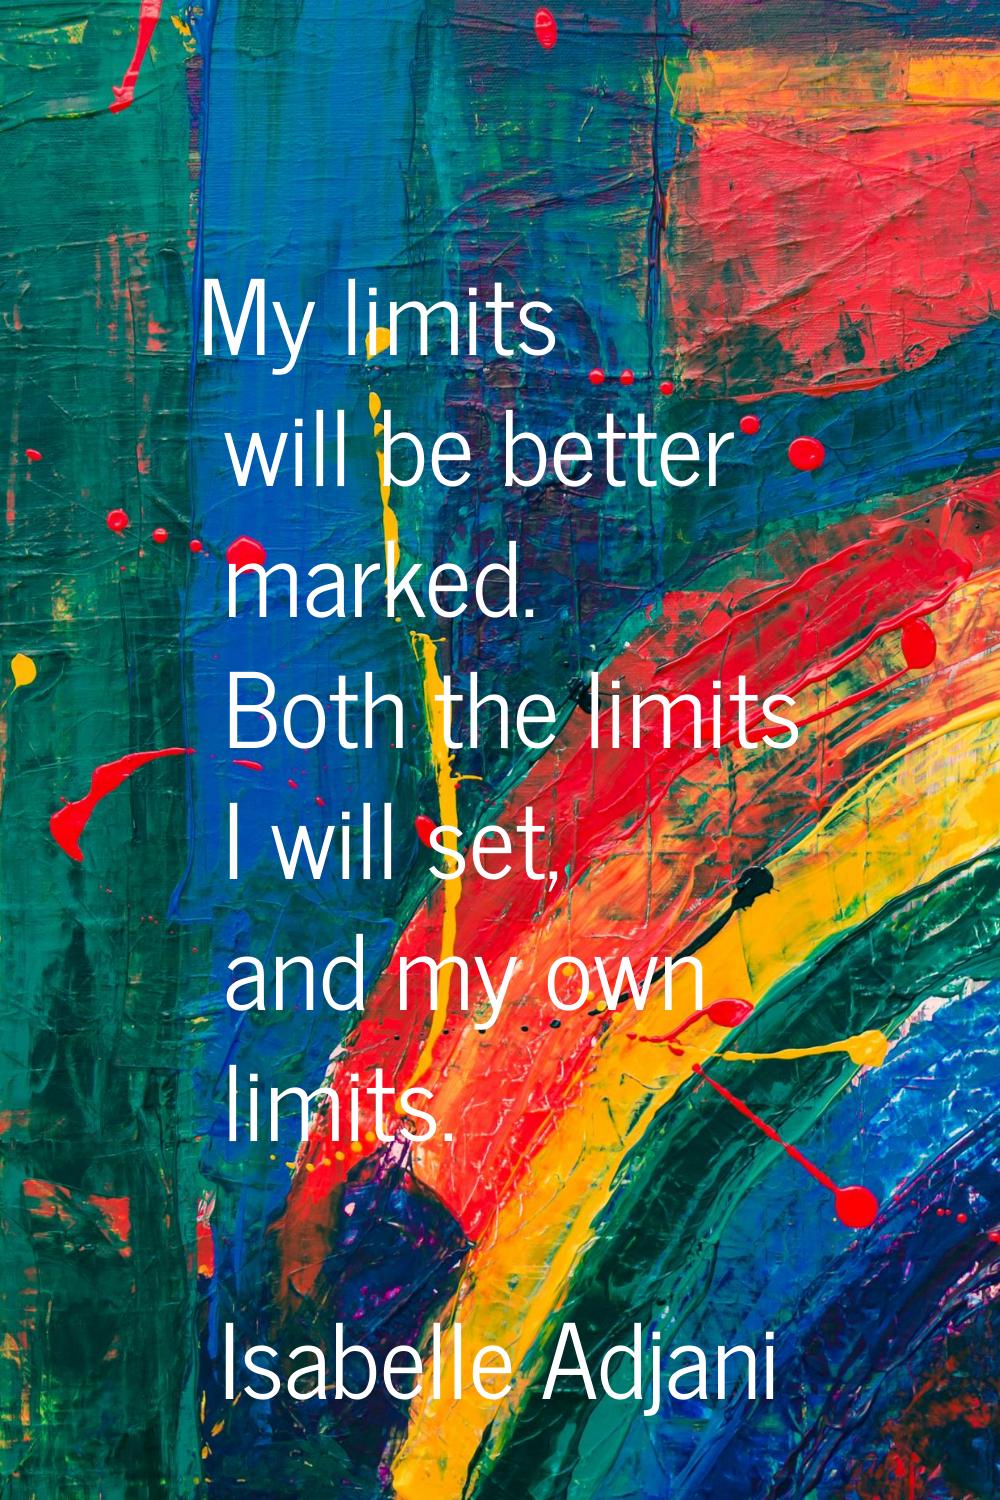 My limits will be better marked. Both the limits I will set, and my own limits.